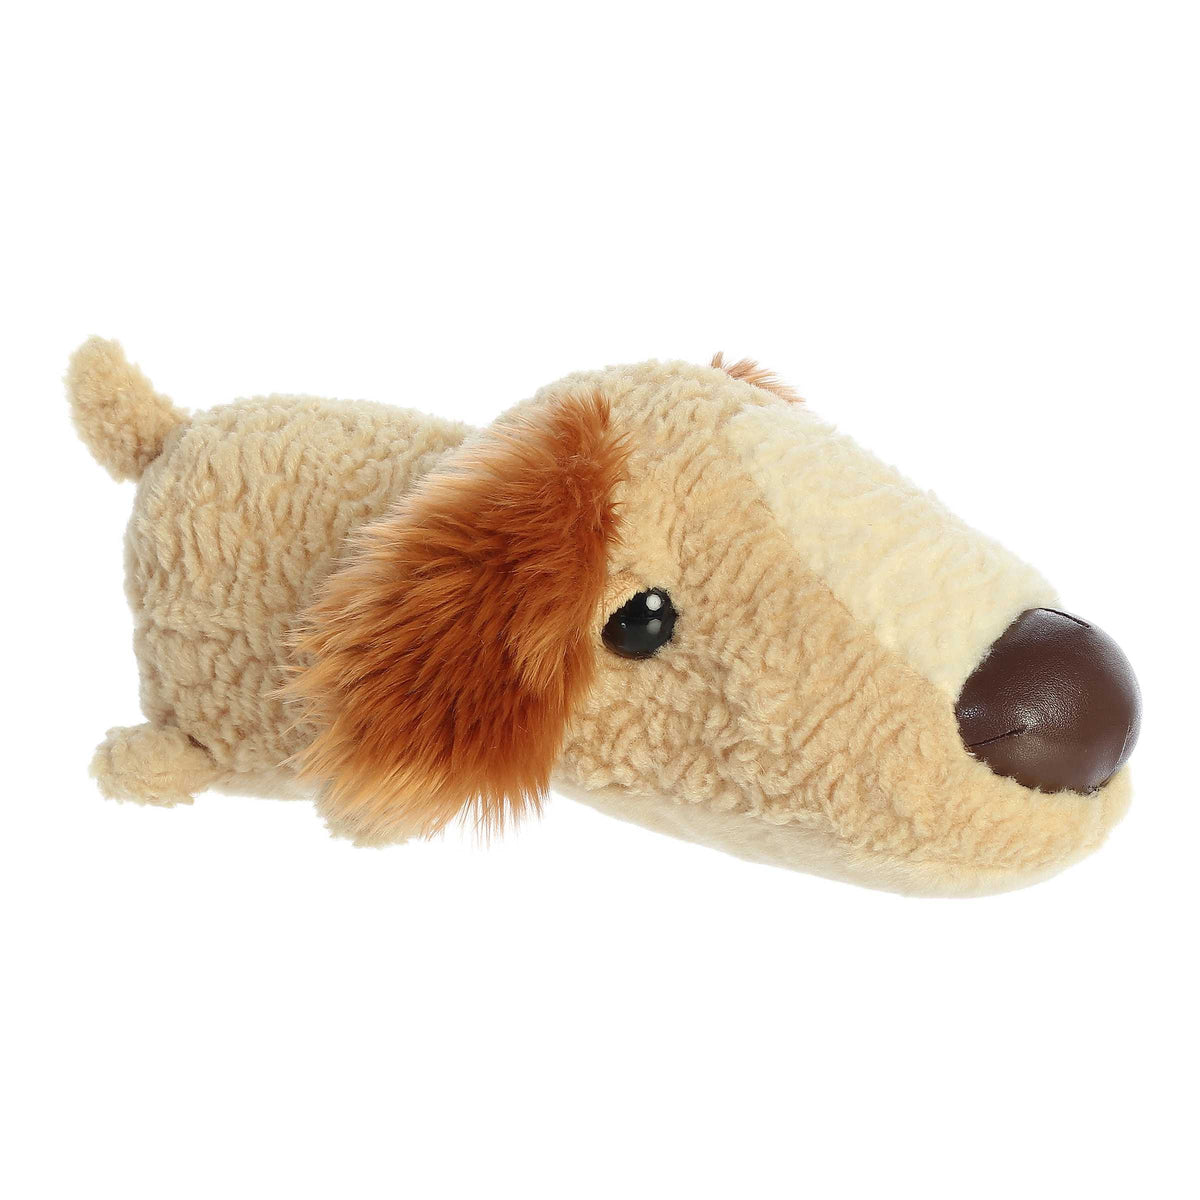 Brooklyn Orzoi from Schnozzles, a plush pup with a fluffy snout and cream fur